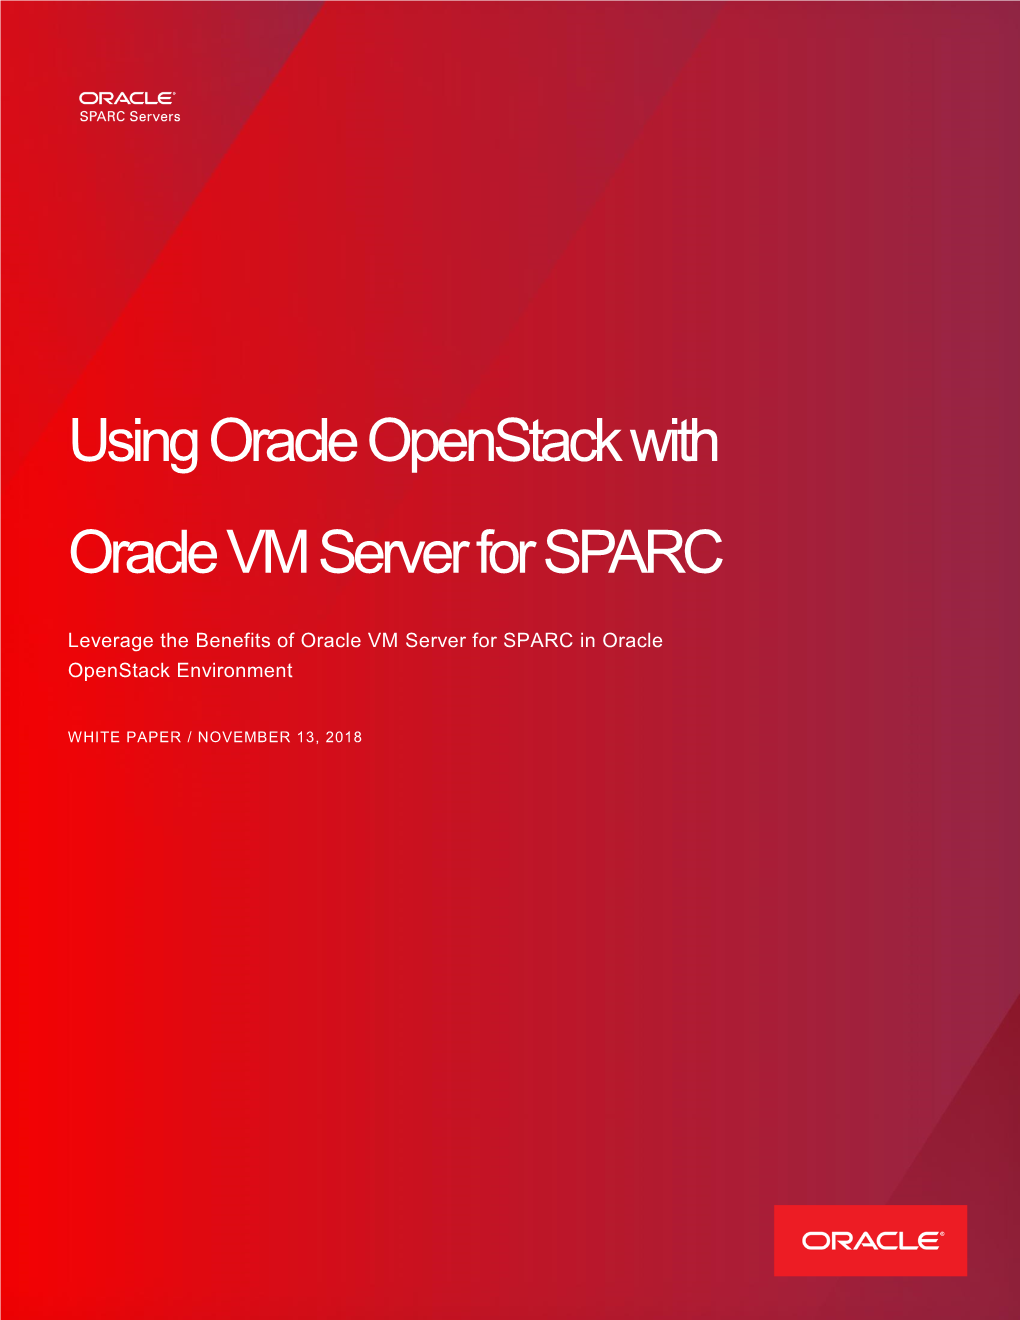 Using Oracle Openstack with Oracle VM Server for SPARC